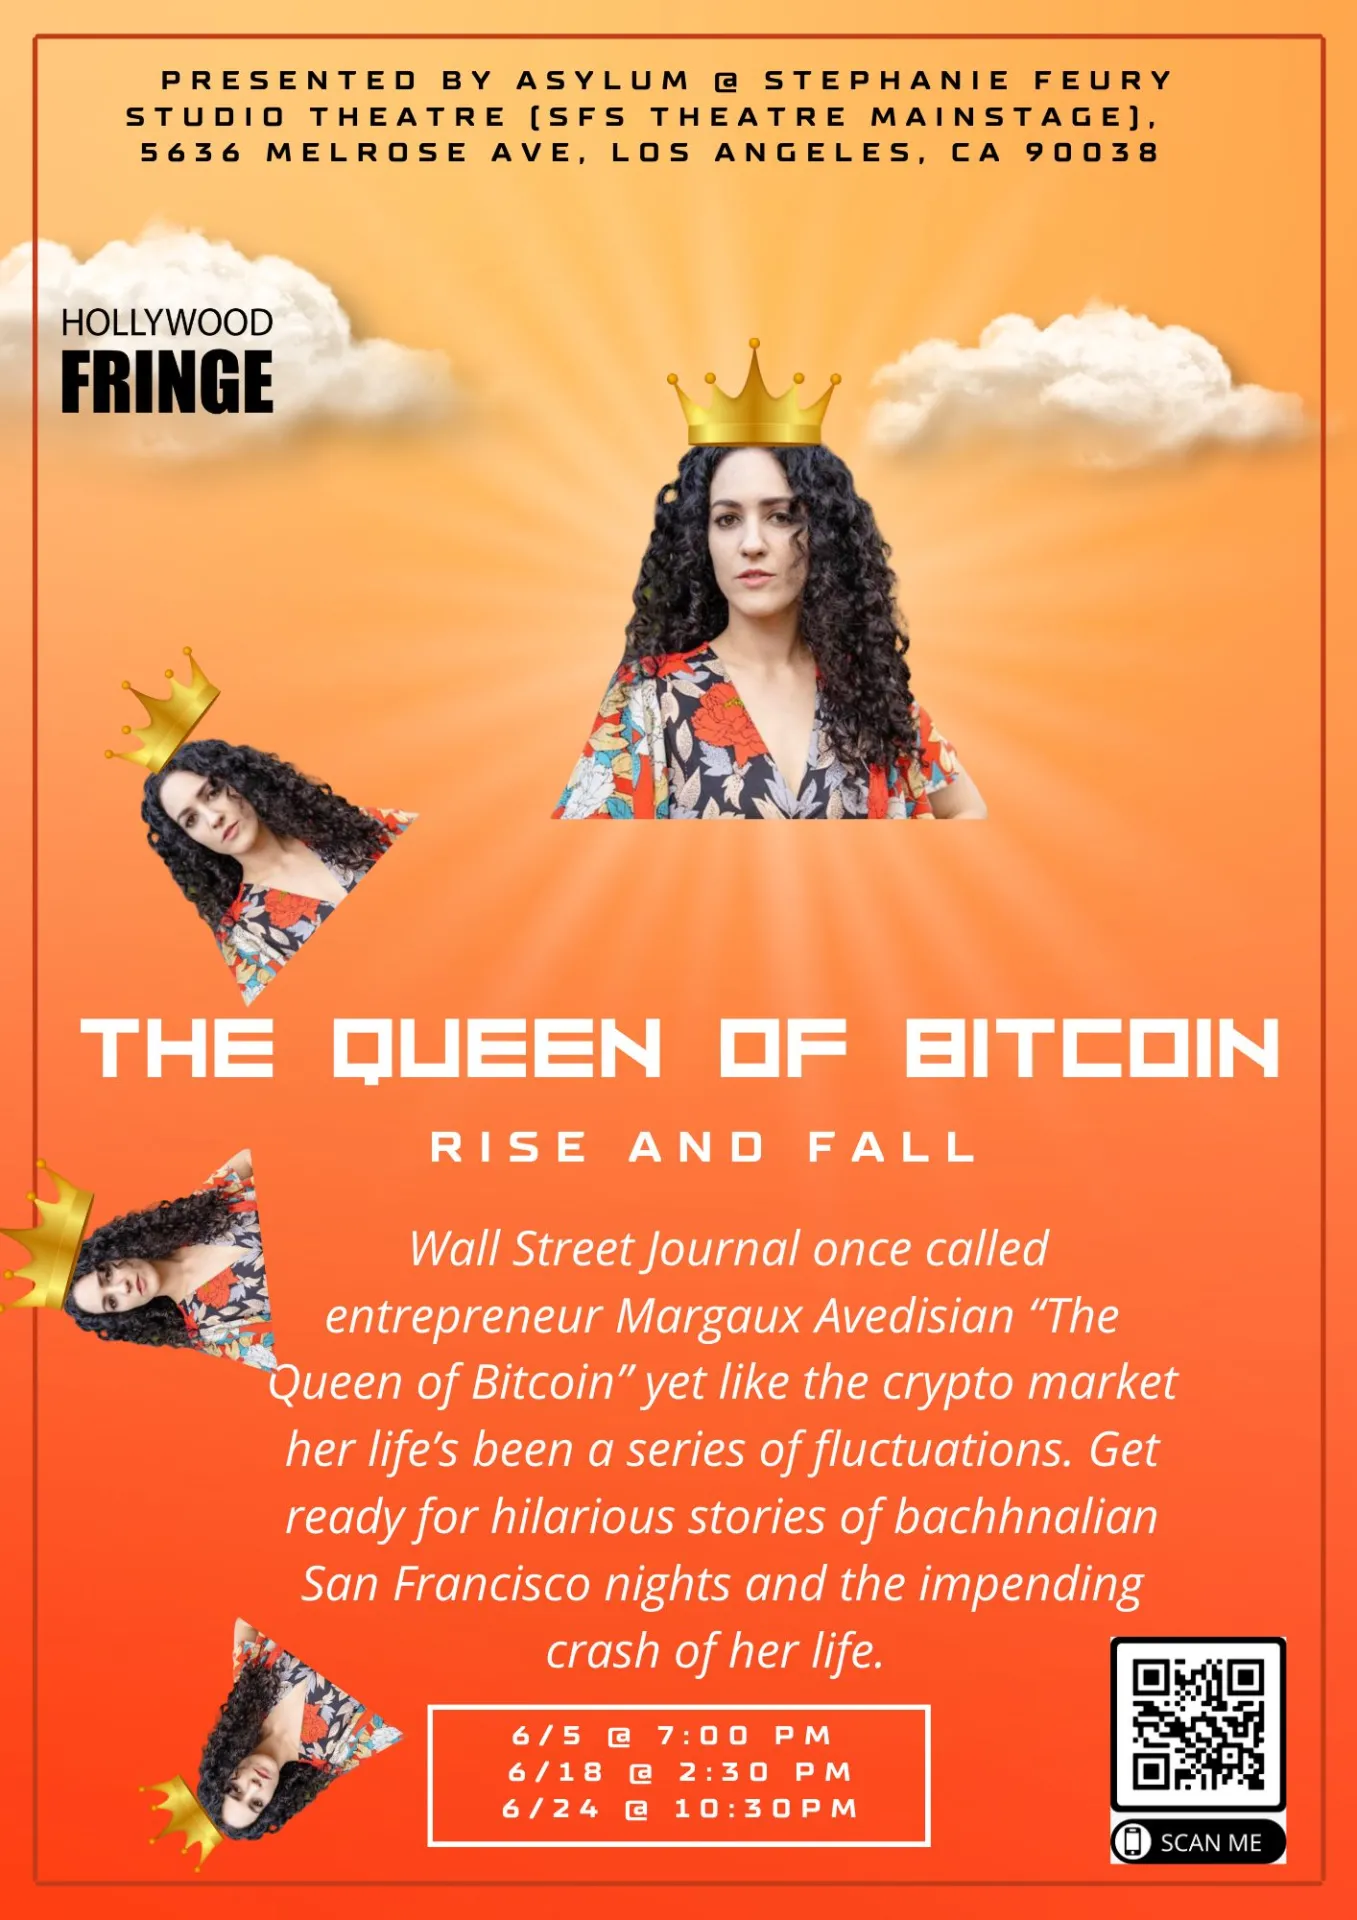 Graphic for "The Queen of Bitcoin: The Rise and Fall"